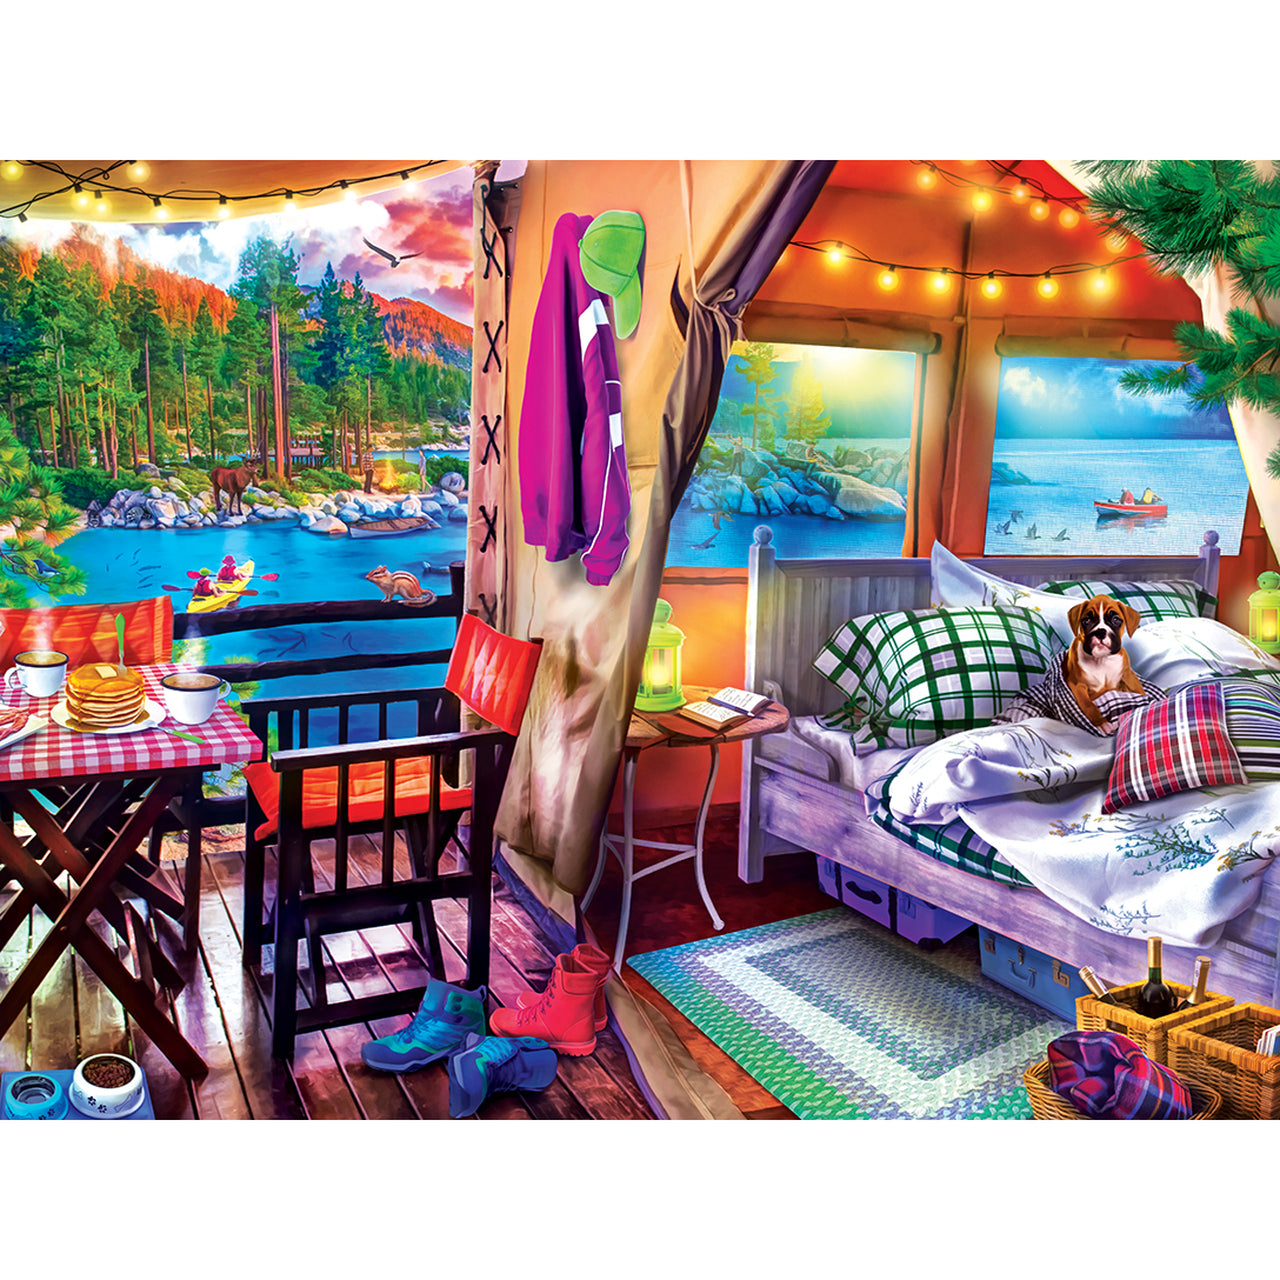 Glamping Style 300 Piece Large Format Campside Puzzle    